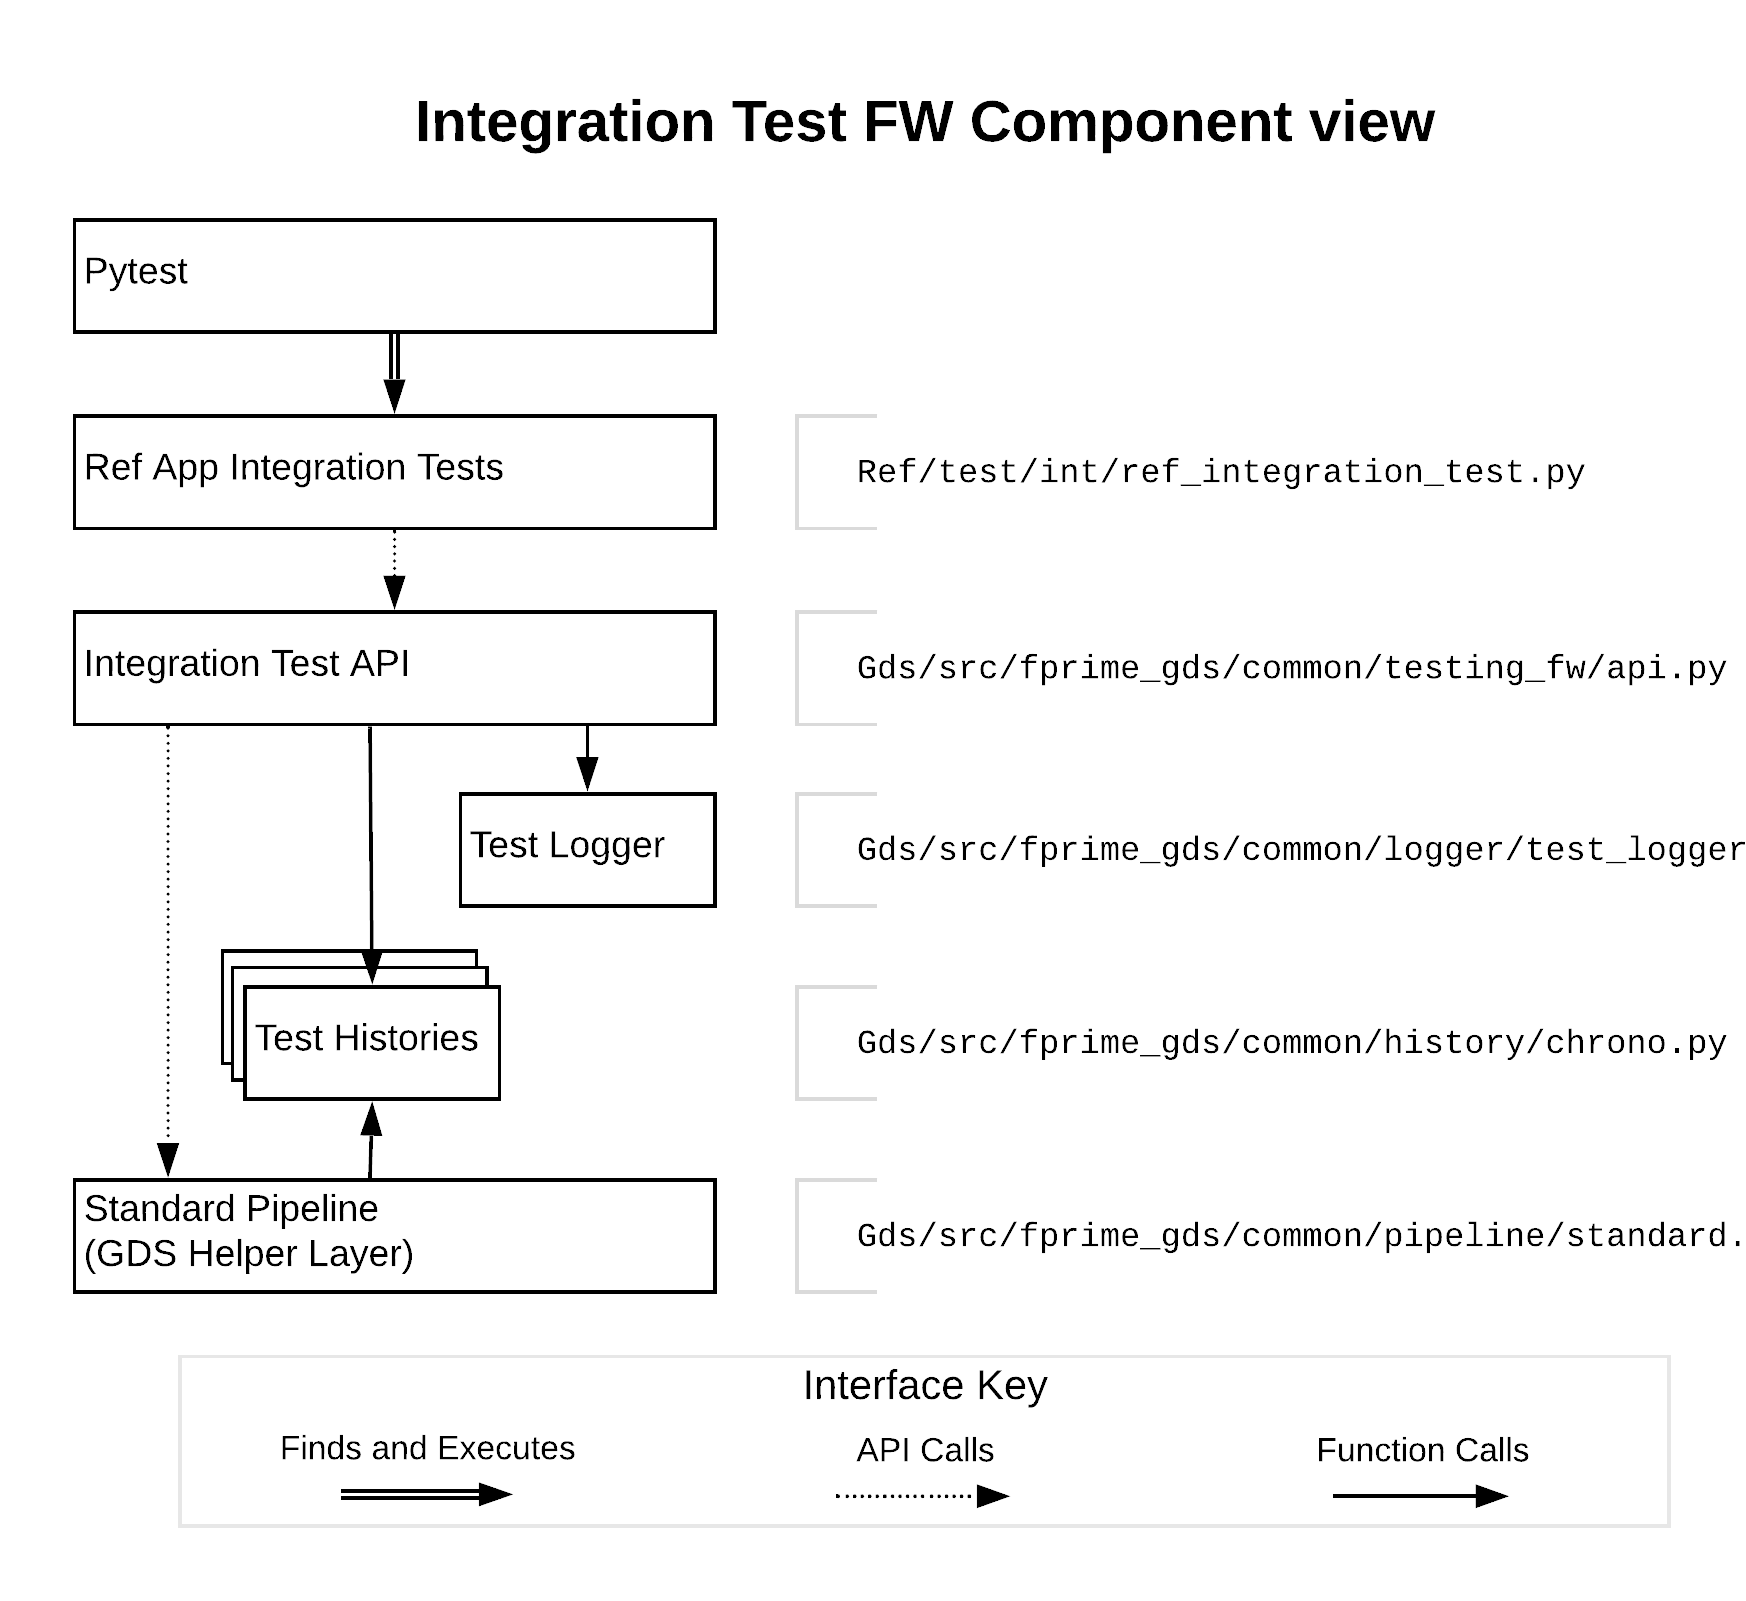 Component View of the Test Framework